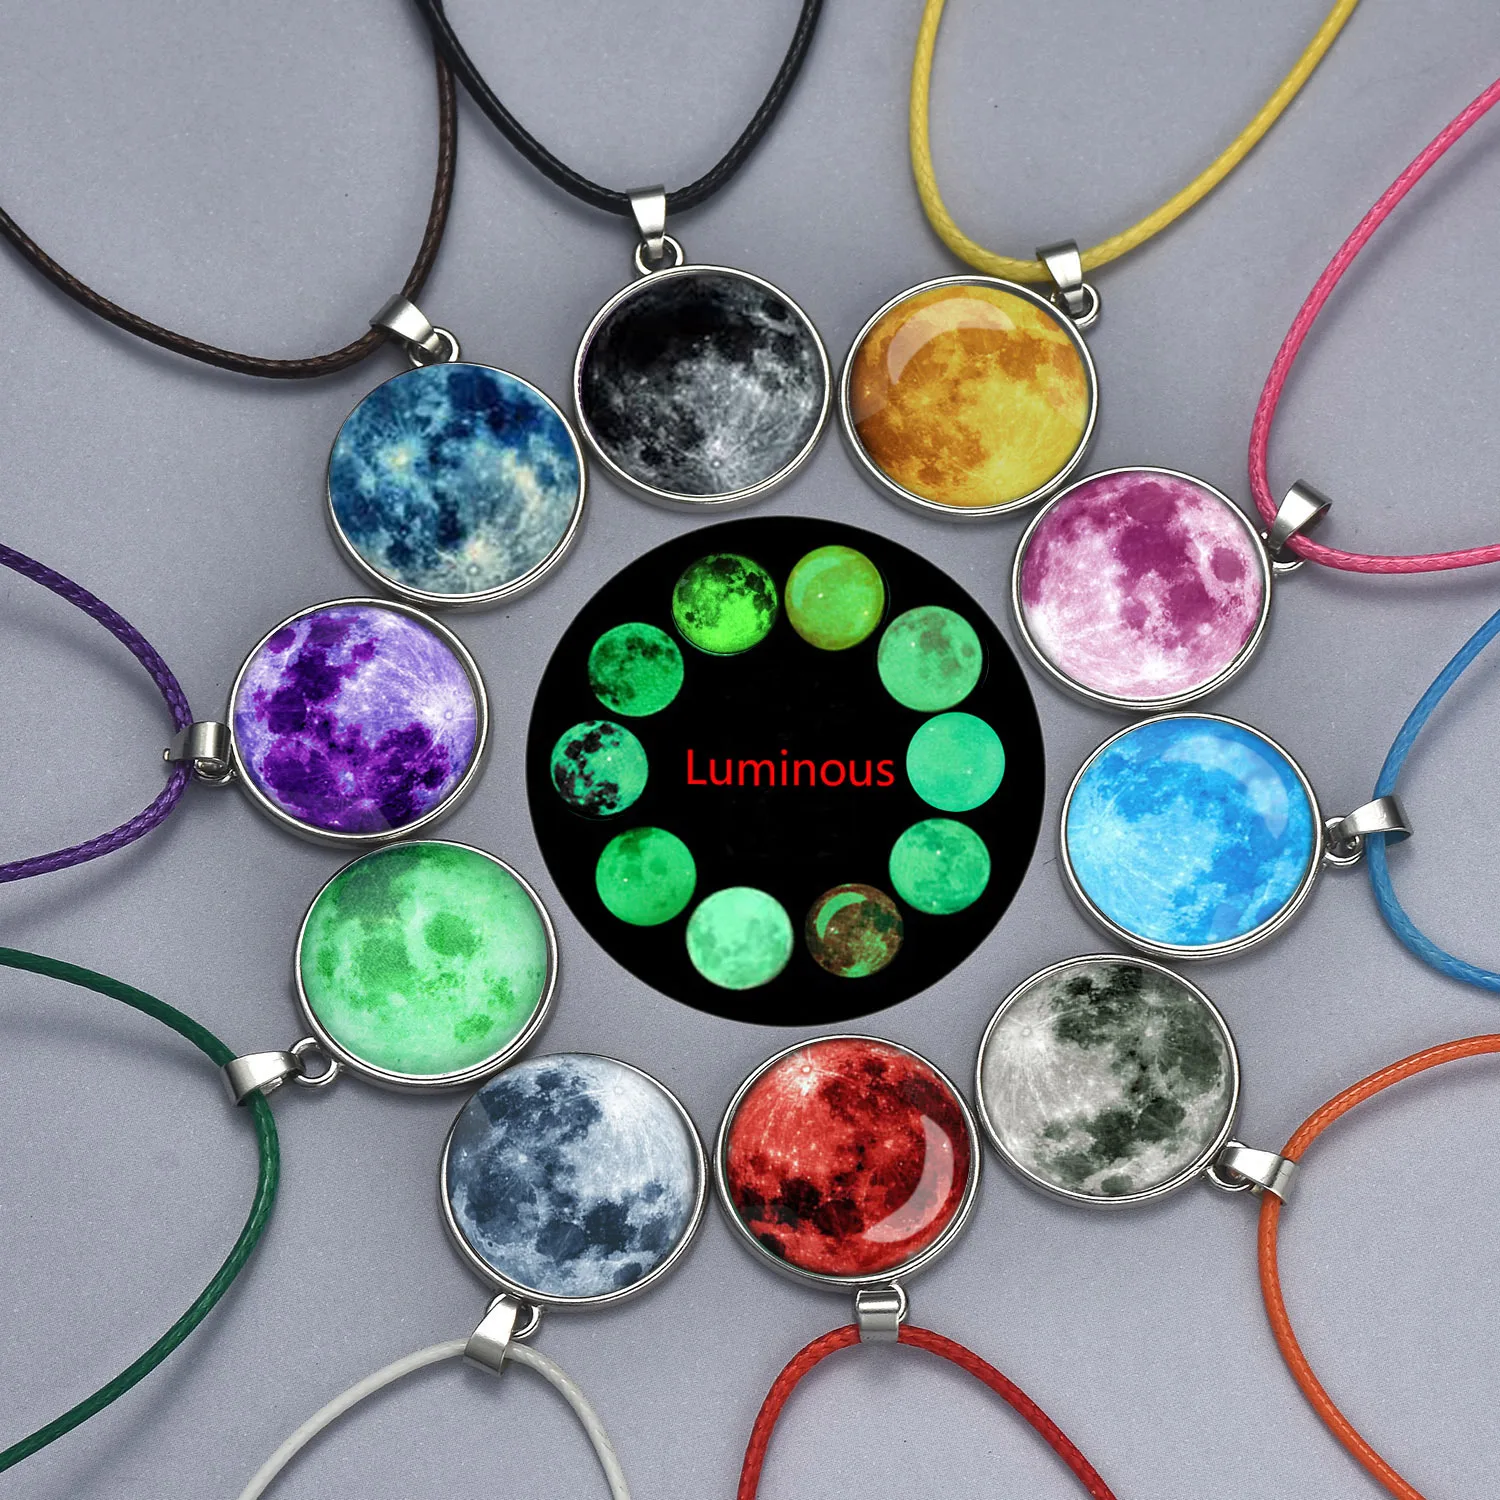 

DAIHE Fashion Round Luminous Starry Sky Pendant Necklace Jewelry Gifts Romantic Glow in The Dark Necklaces